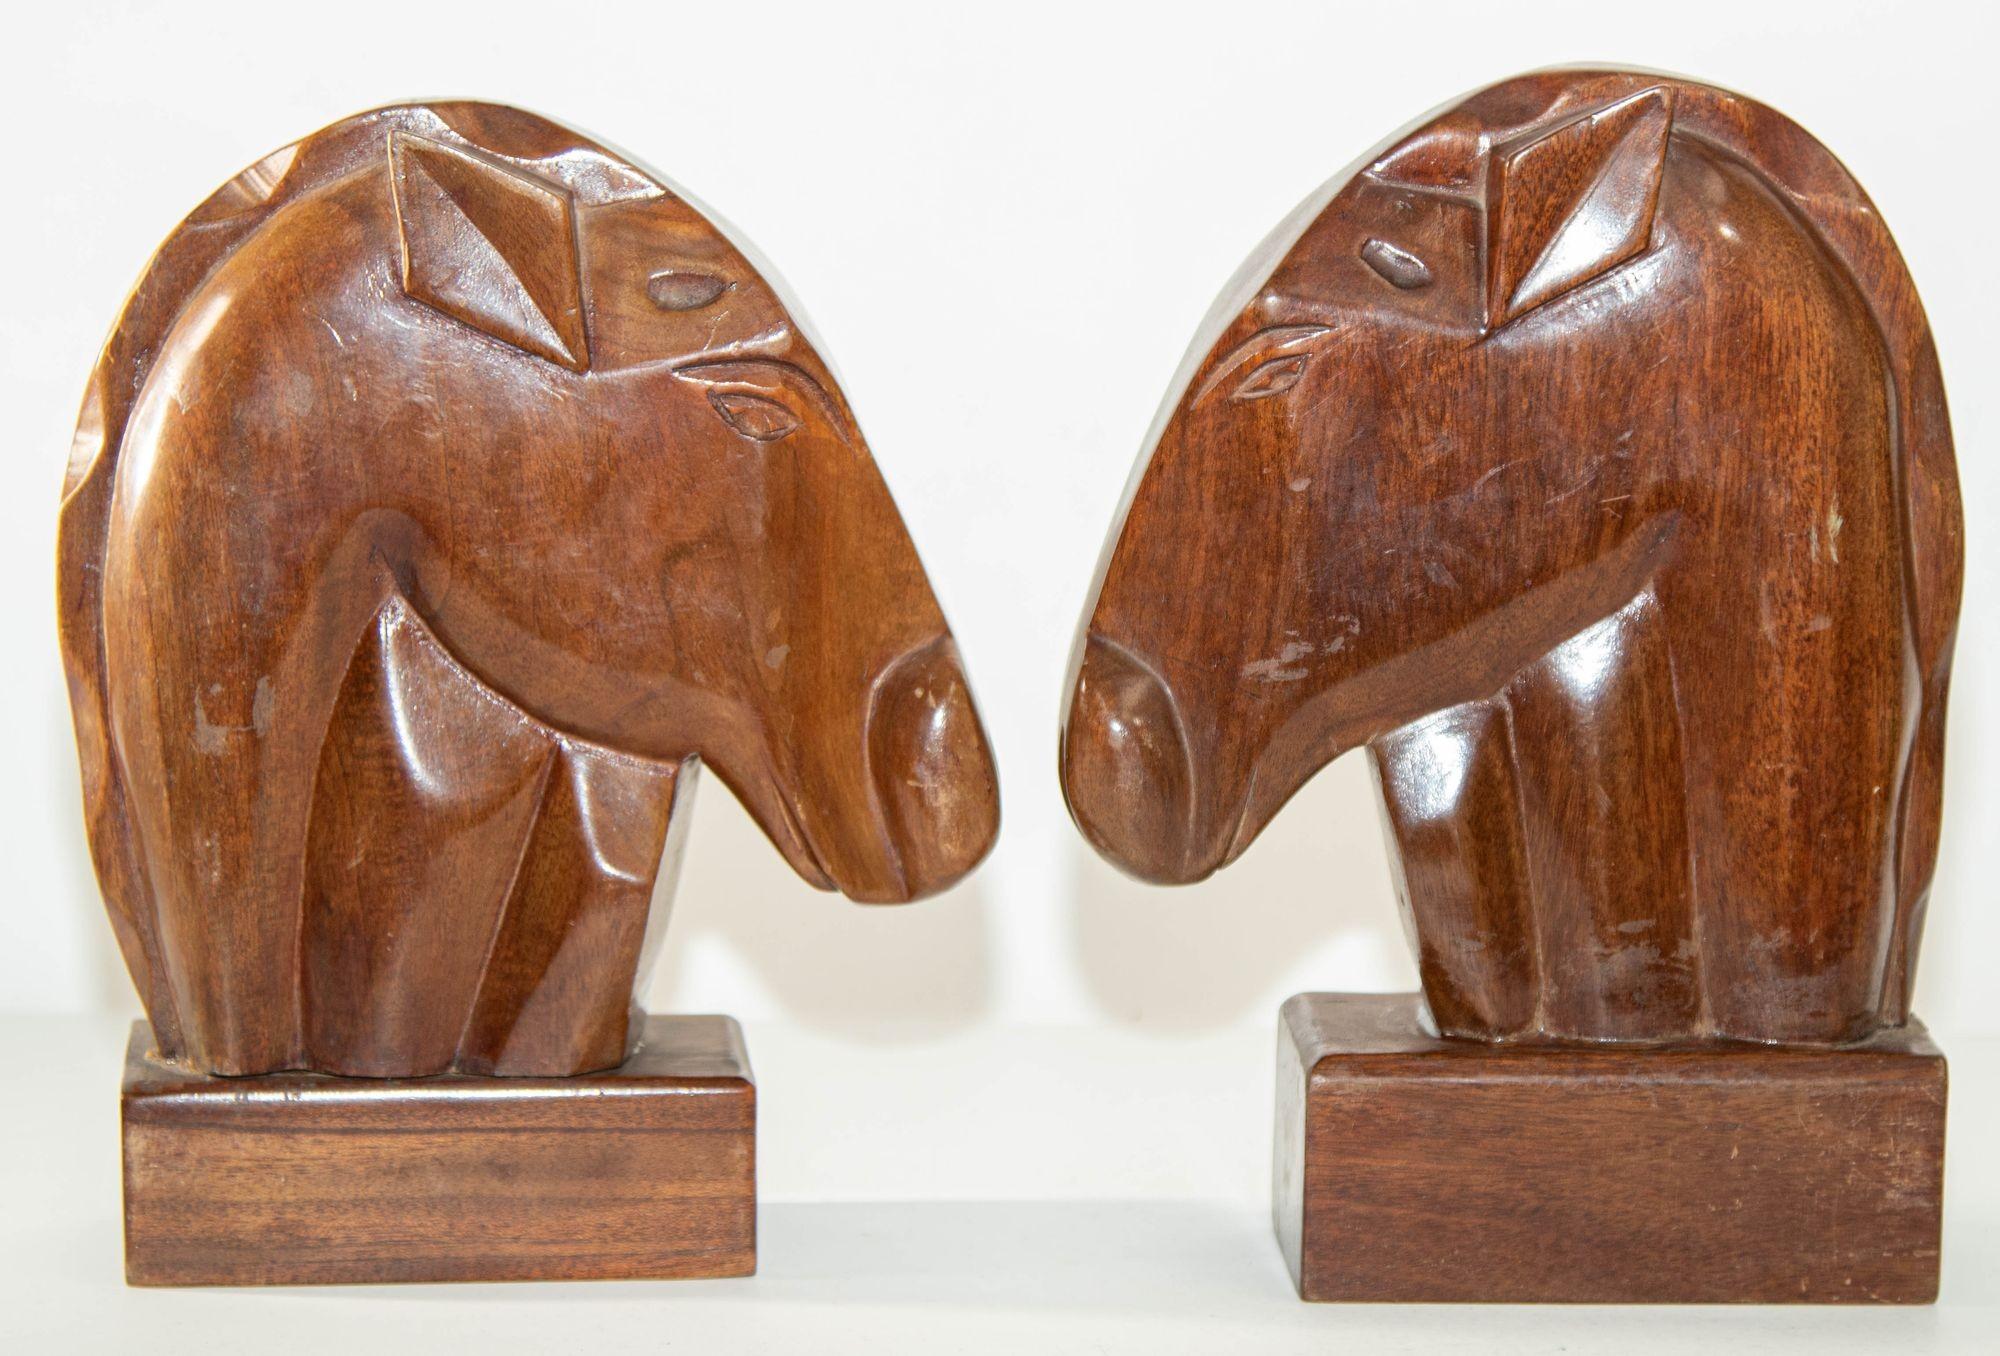 Vintage pair of hand carved wooden Art Deco style horse head bookends.
Large heavy wood vintage hand carved Art Deco style Folk Art horse bust book ends on a pedestal-type base.
Each measures approximately 9.5